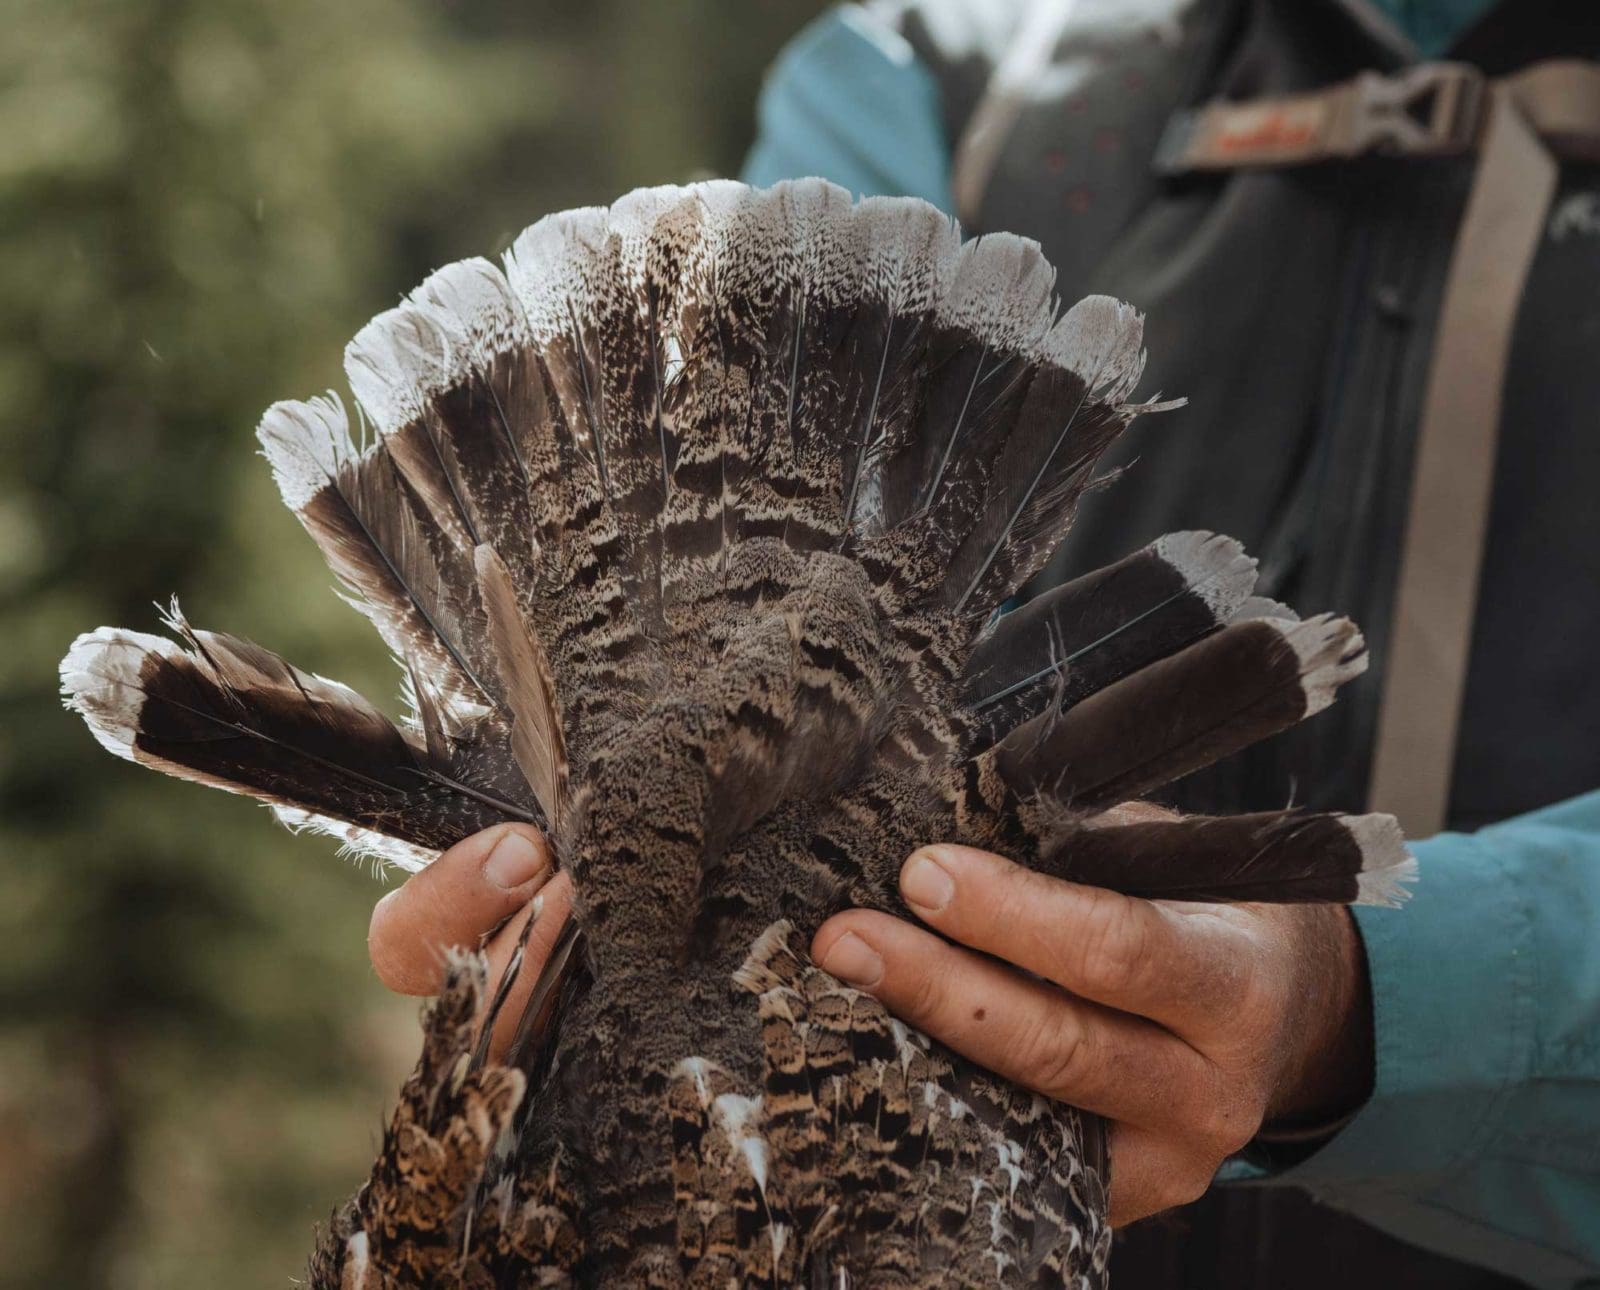 A blue grouse hunter shows the tail fan of a blue grouse